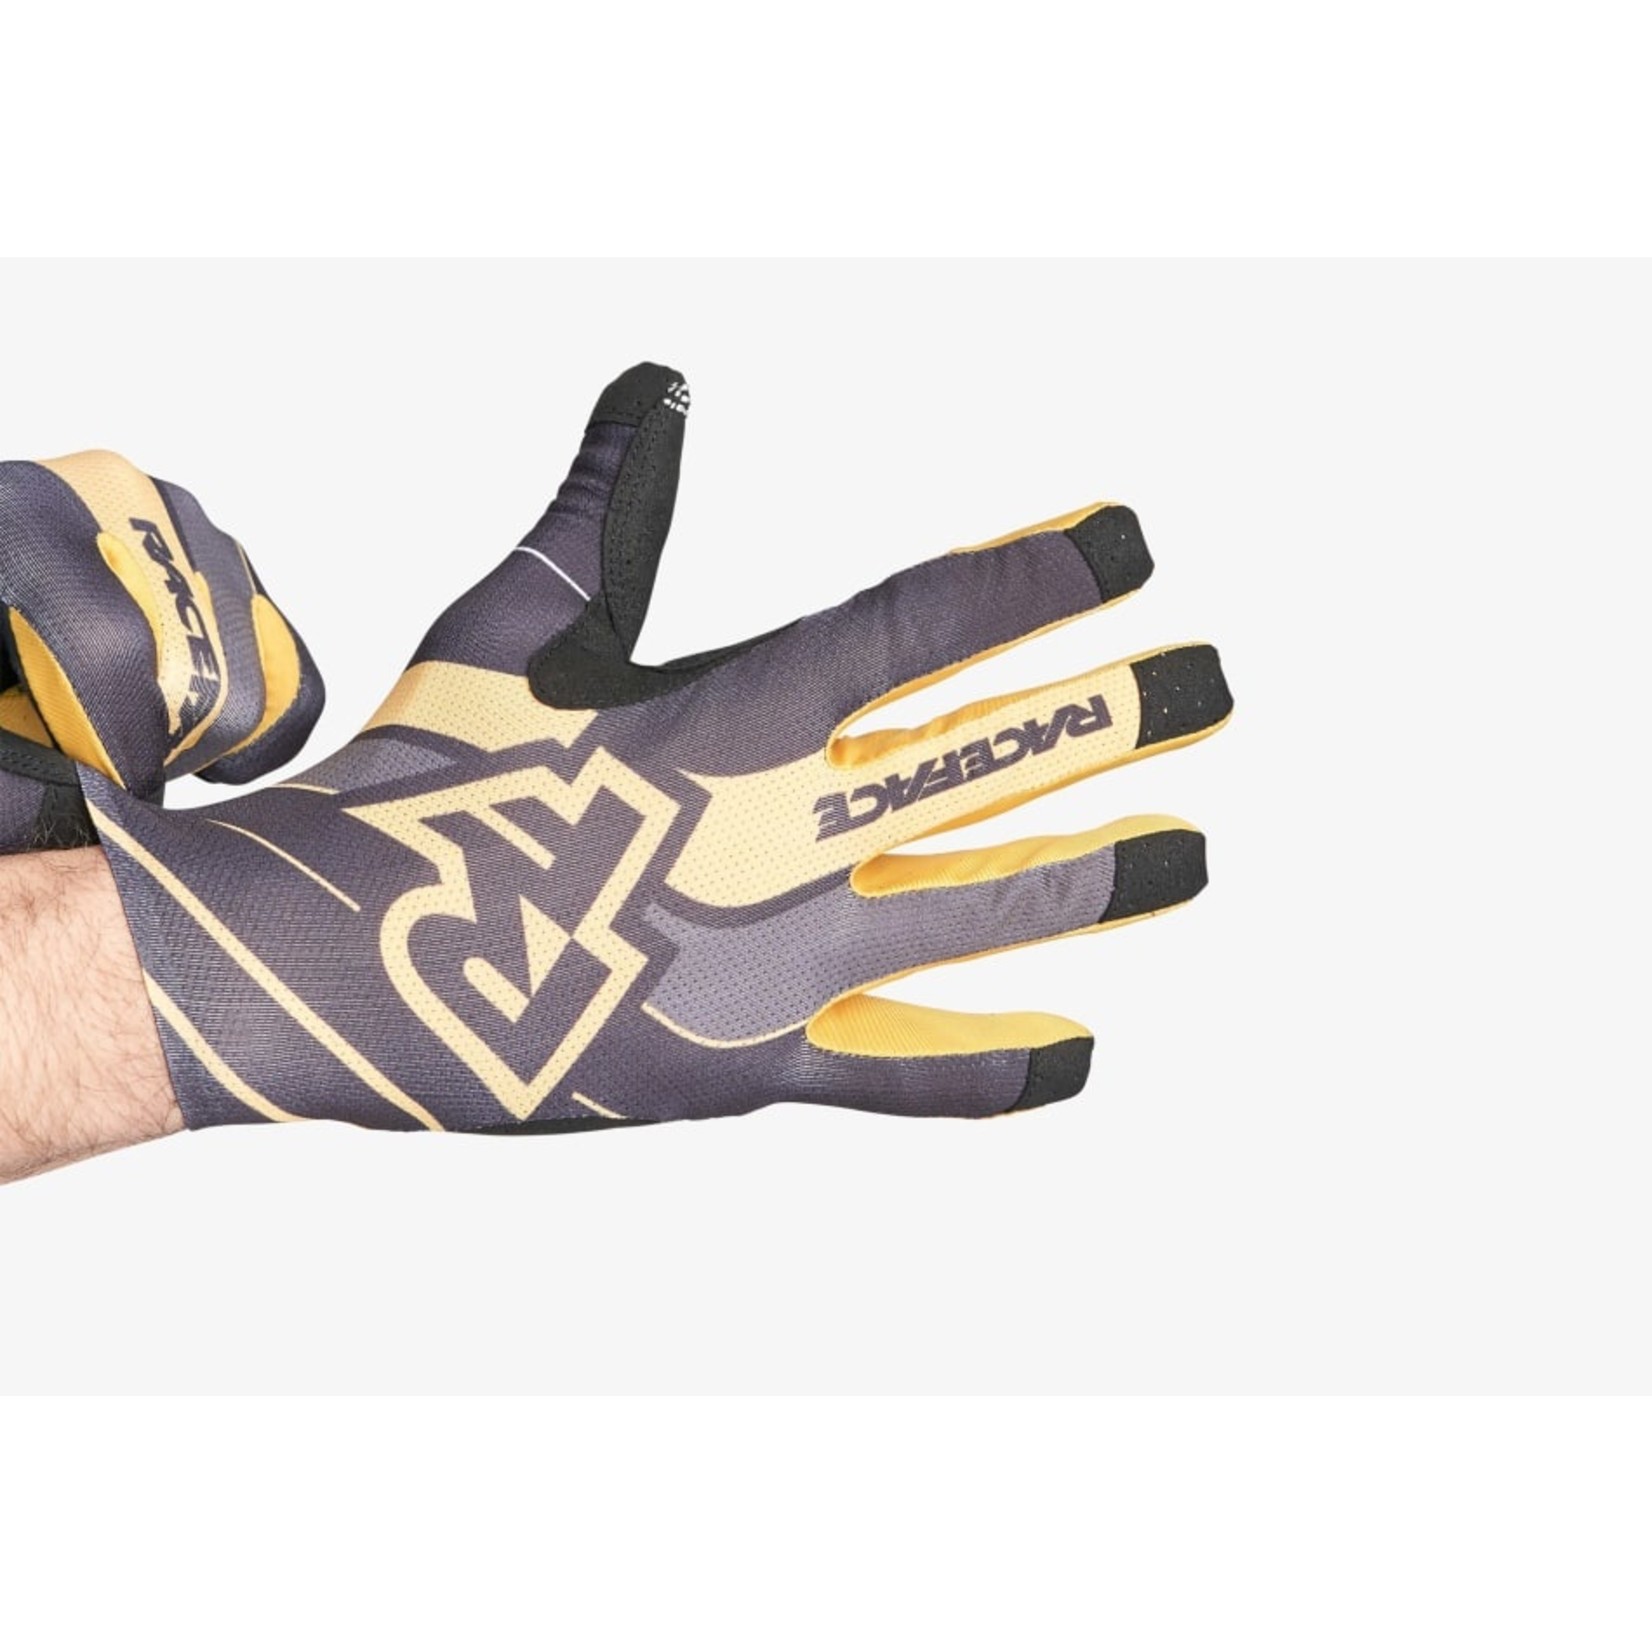 2021 Raceface Indy Glove